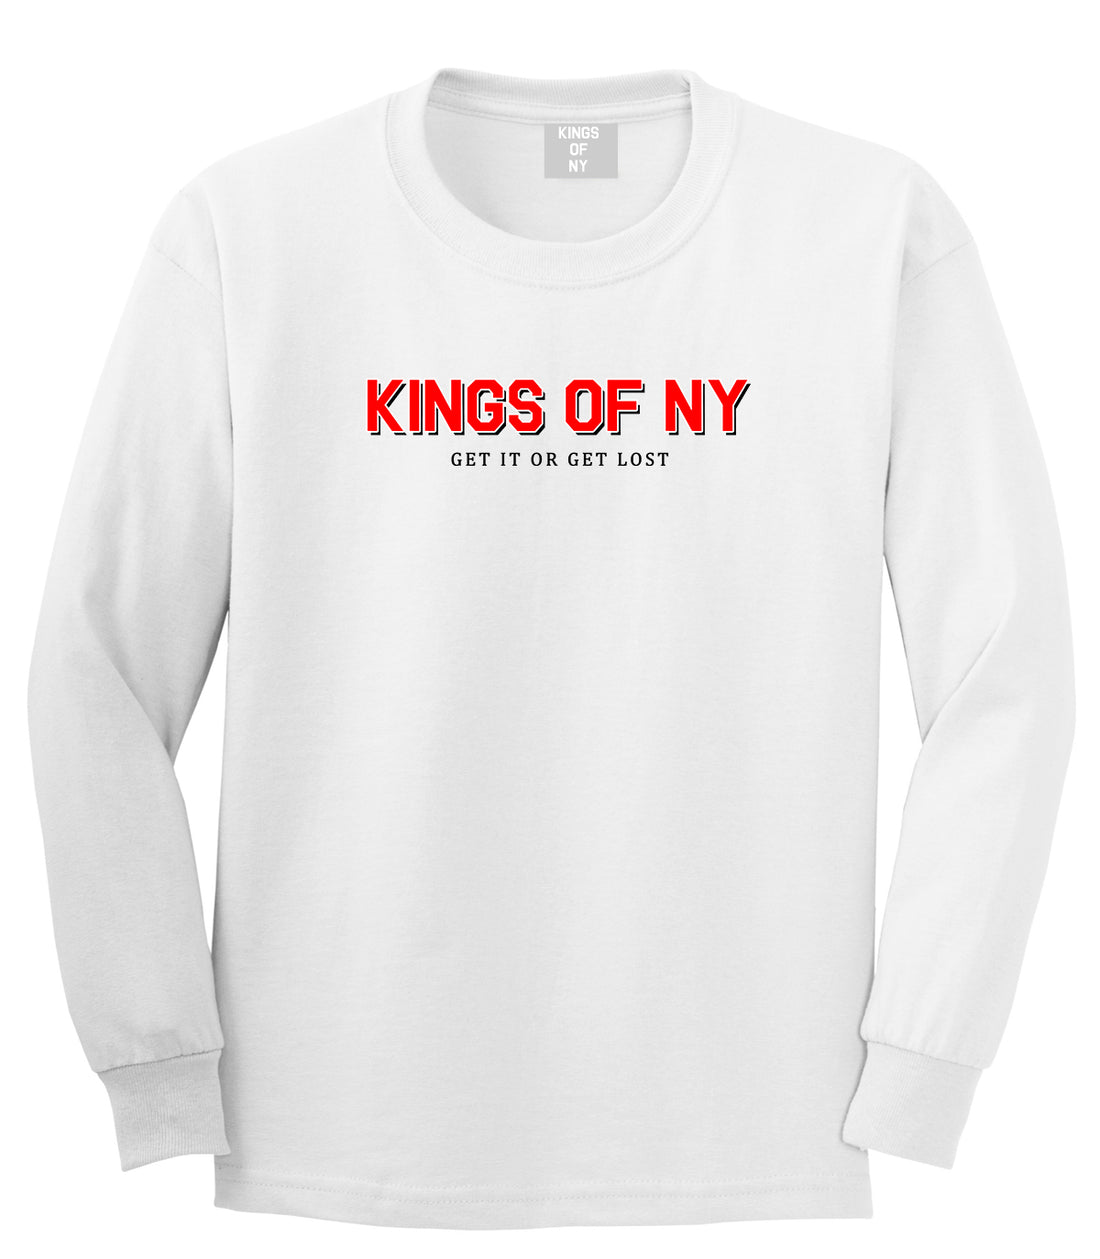 Get It Or Get Lost Mens Long Sleeve T-Shirt White by Kings Of NY